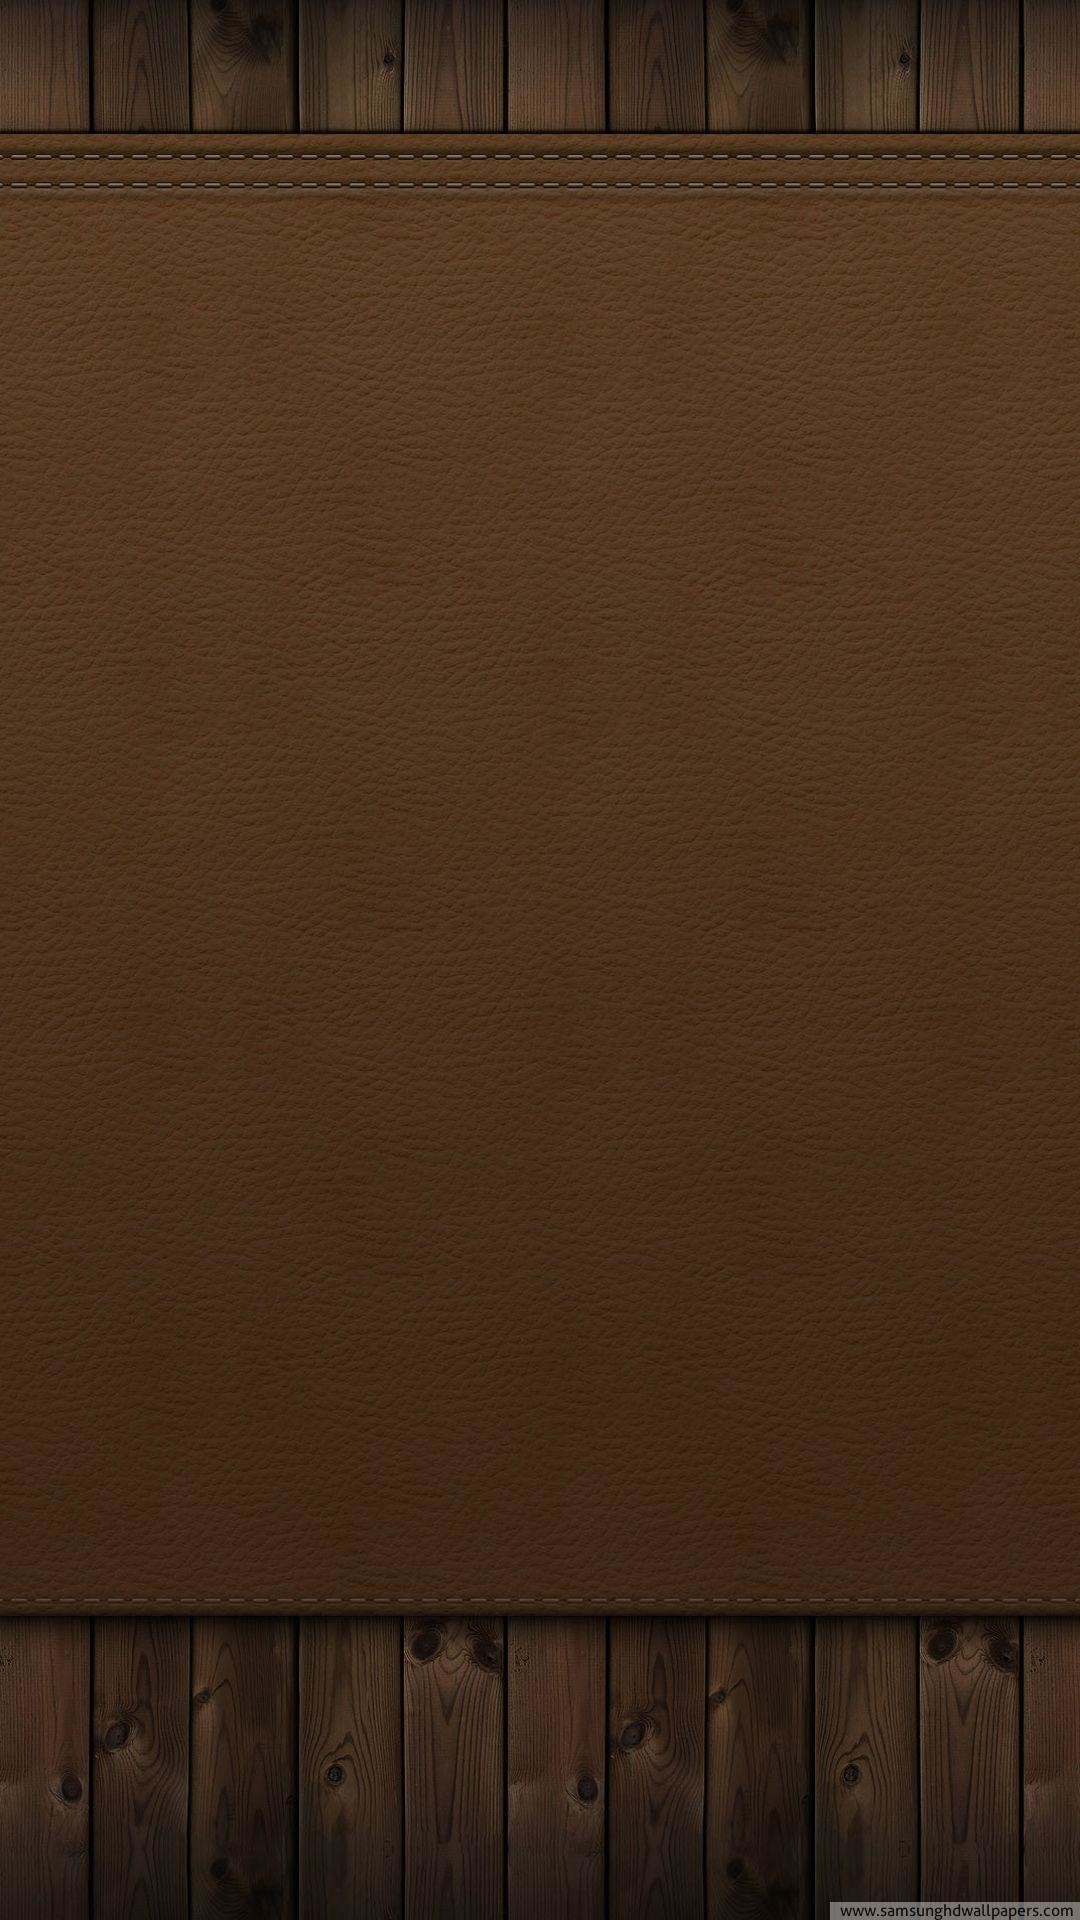 1080x1920 Wood and leather wall HD Samsung S4 wallpaper